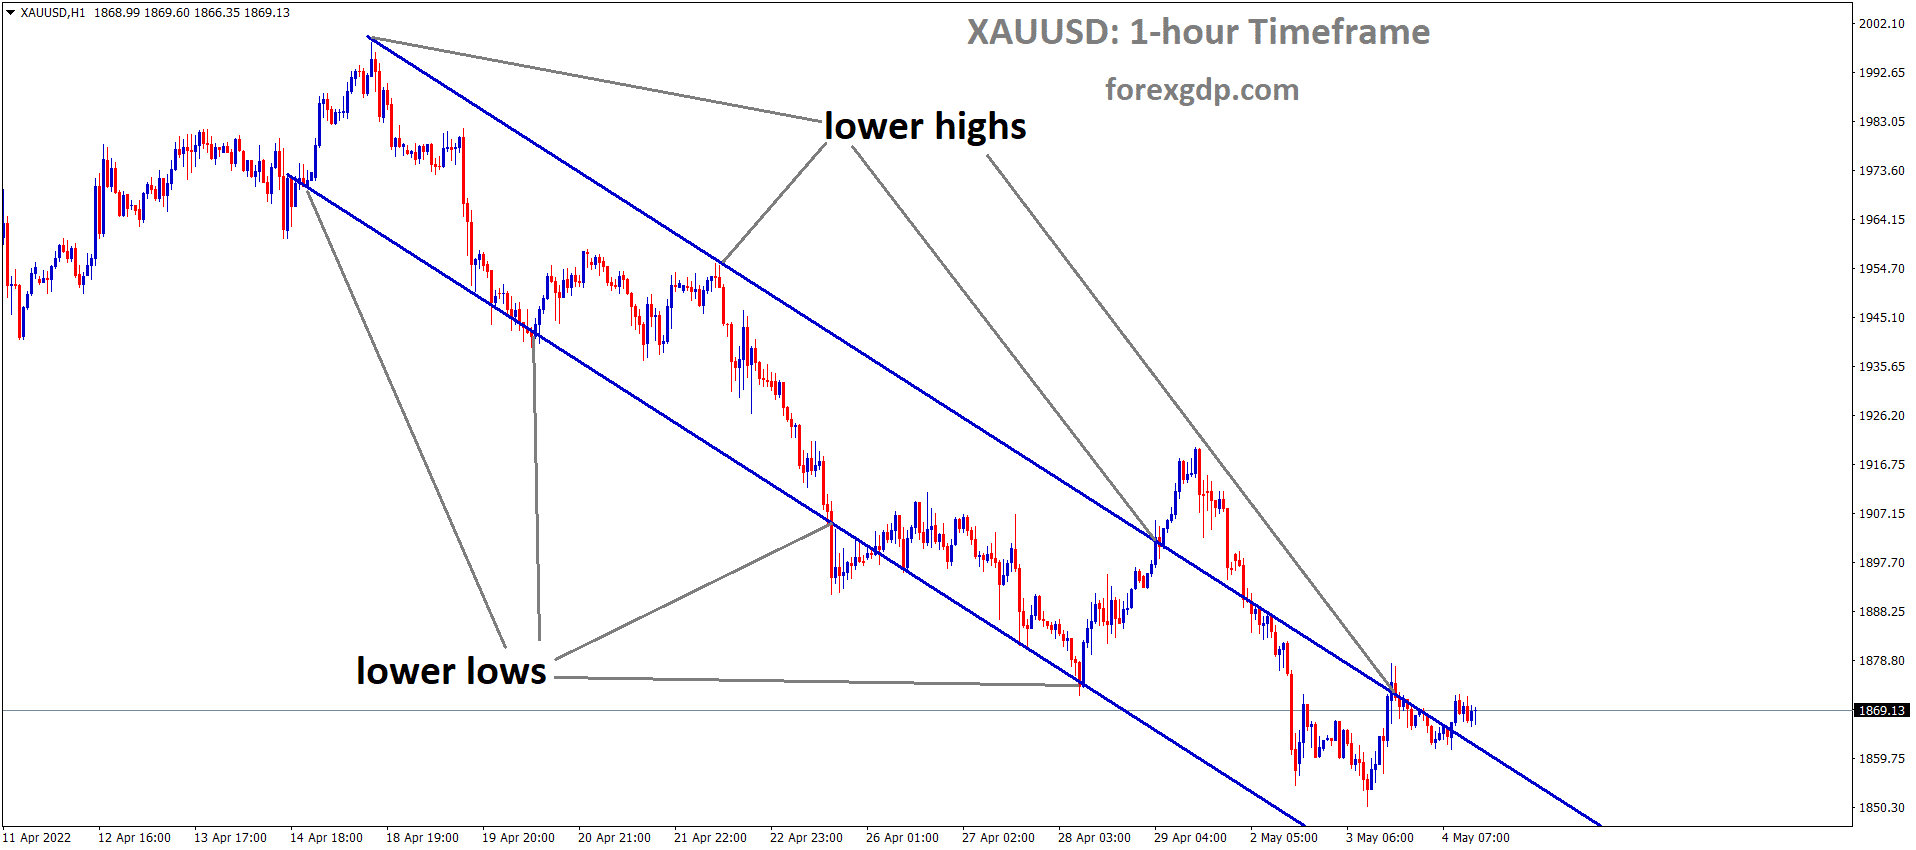 XAUUSD H1 Time Frame Analysis Market is moving in the Descending channel and the Market has reached the lower high area of the Channel